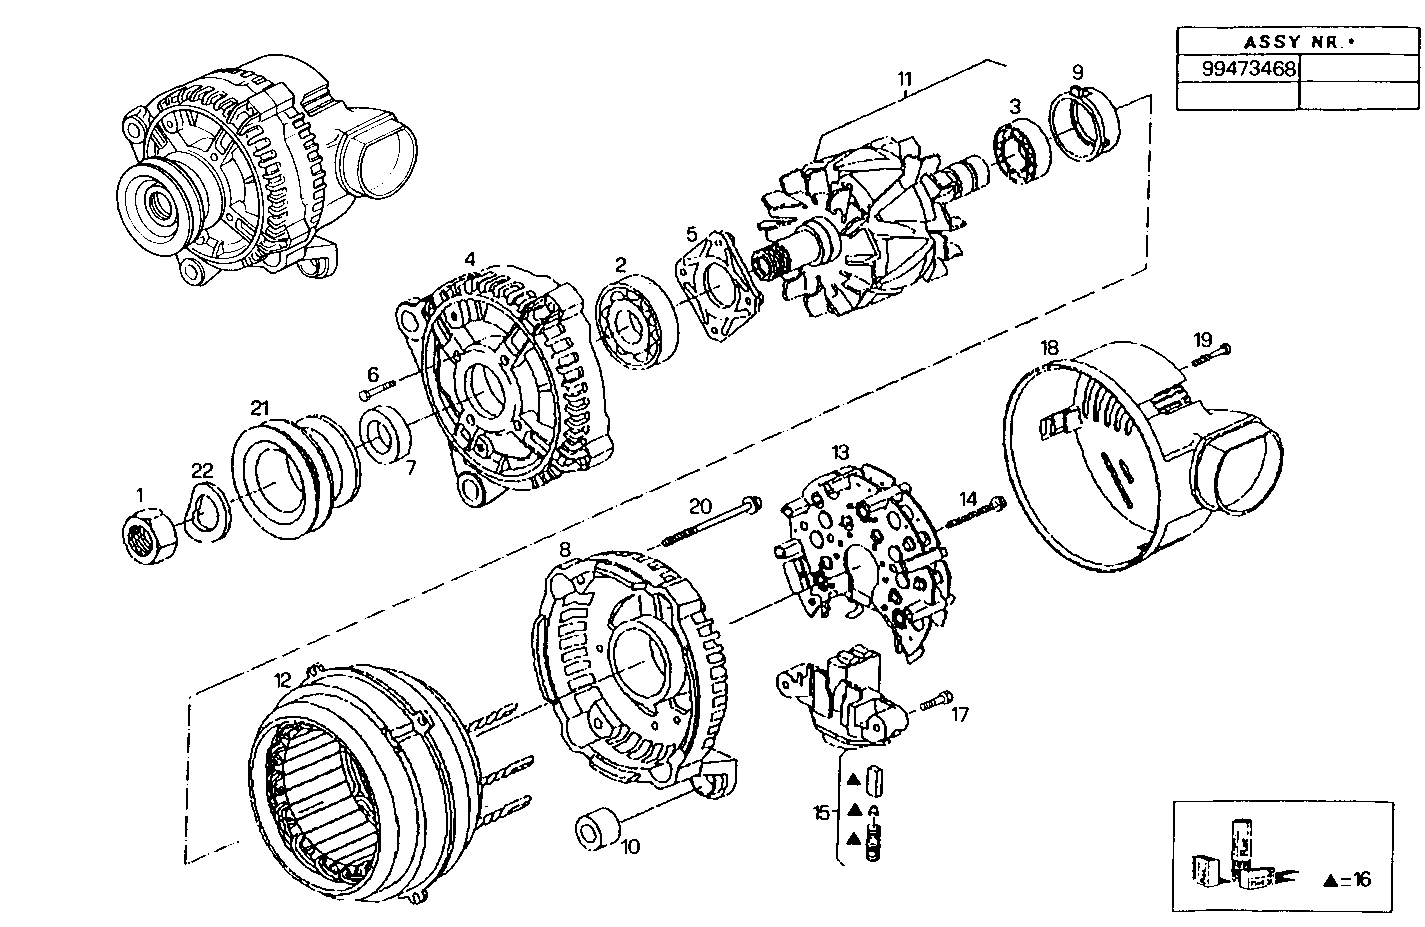 Iveco/FPT GENERATOR (COMPONENTS)